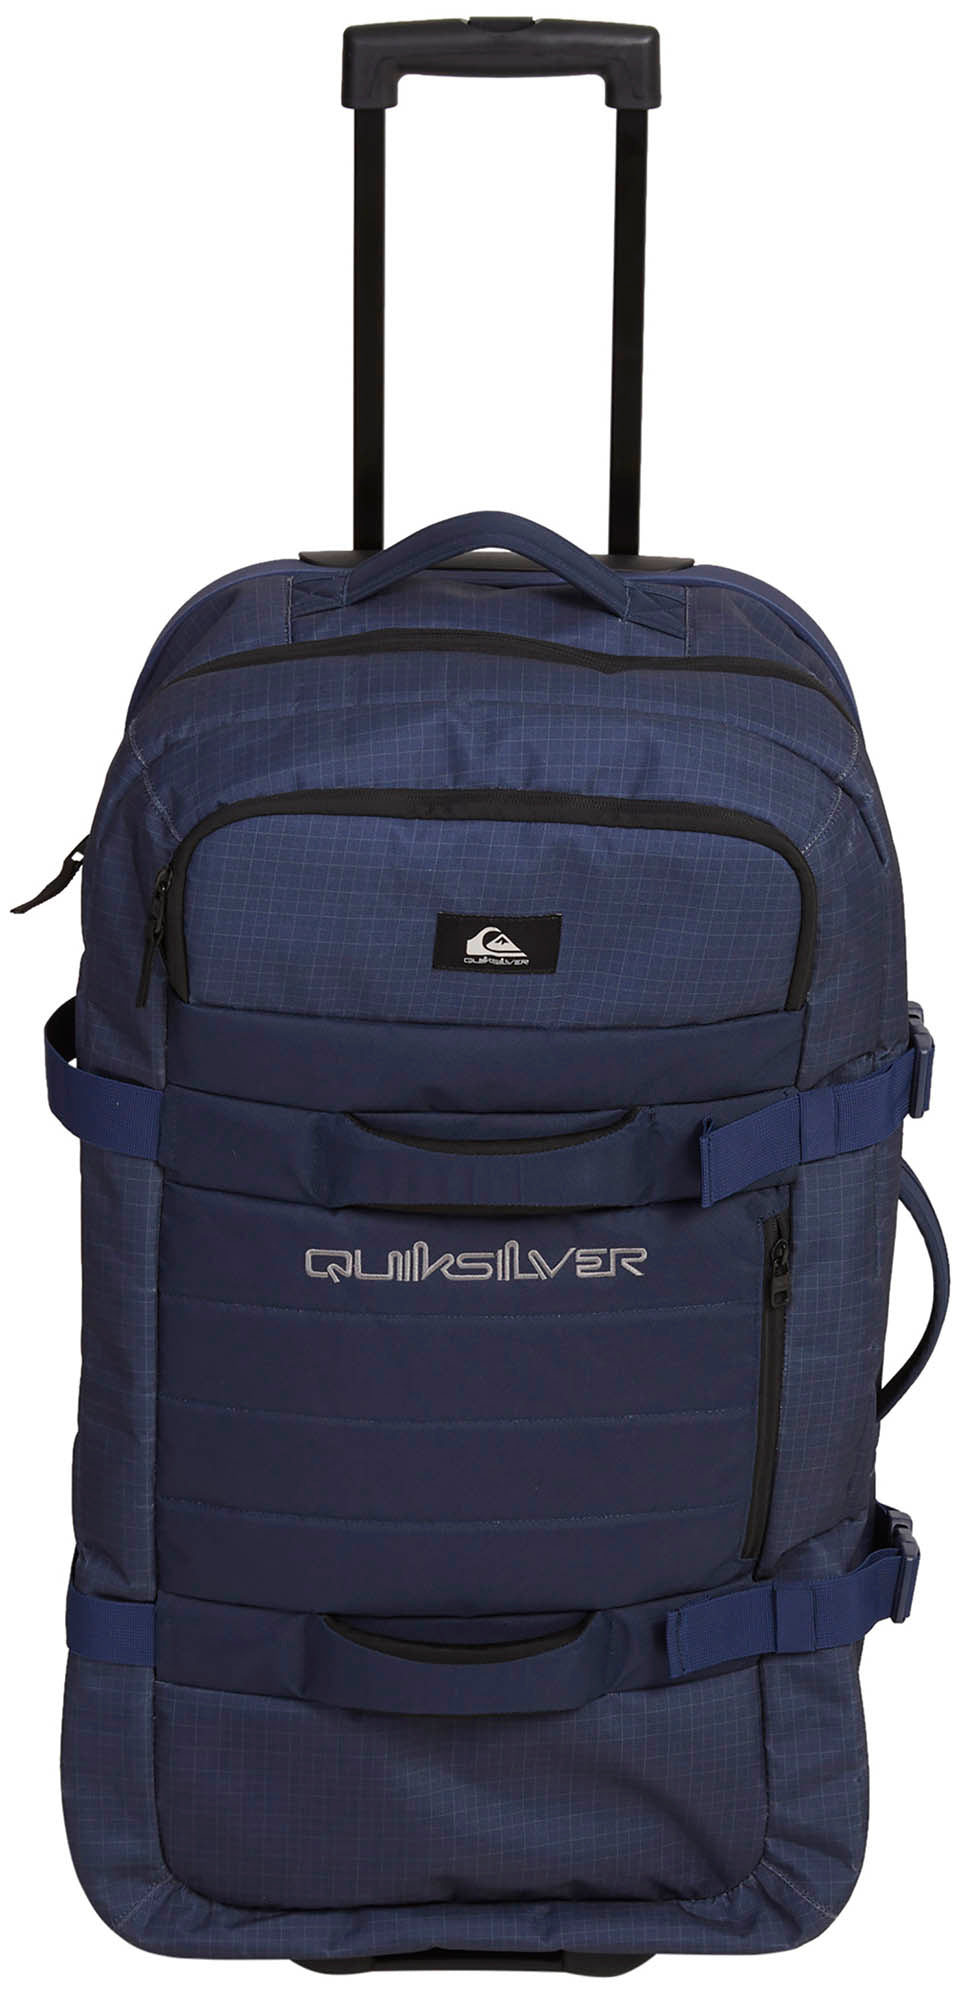 Quiksilver New Reach 100L Suitcase Naval - thebackpacker – Academy